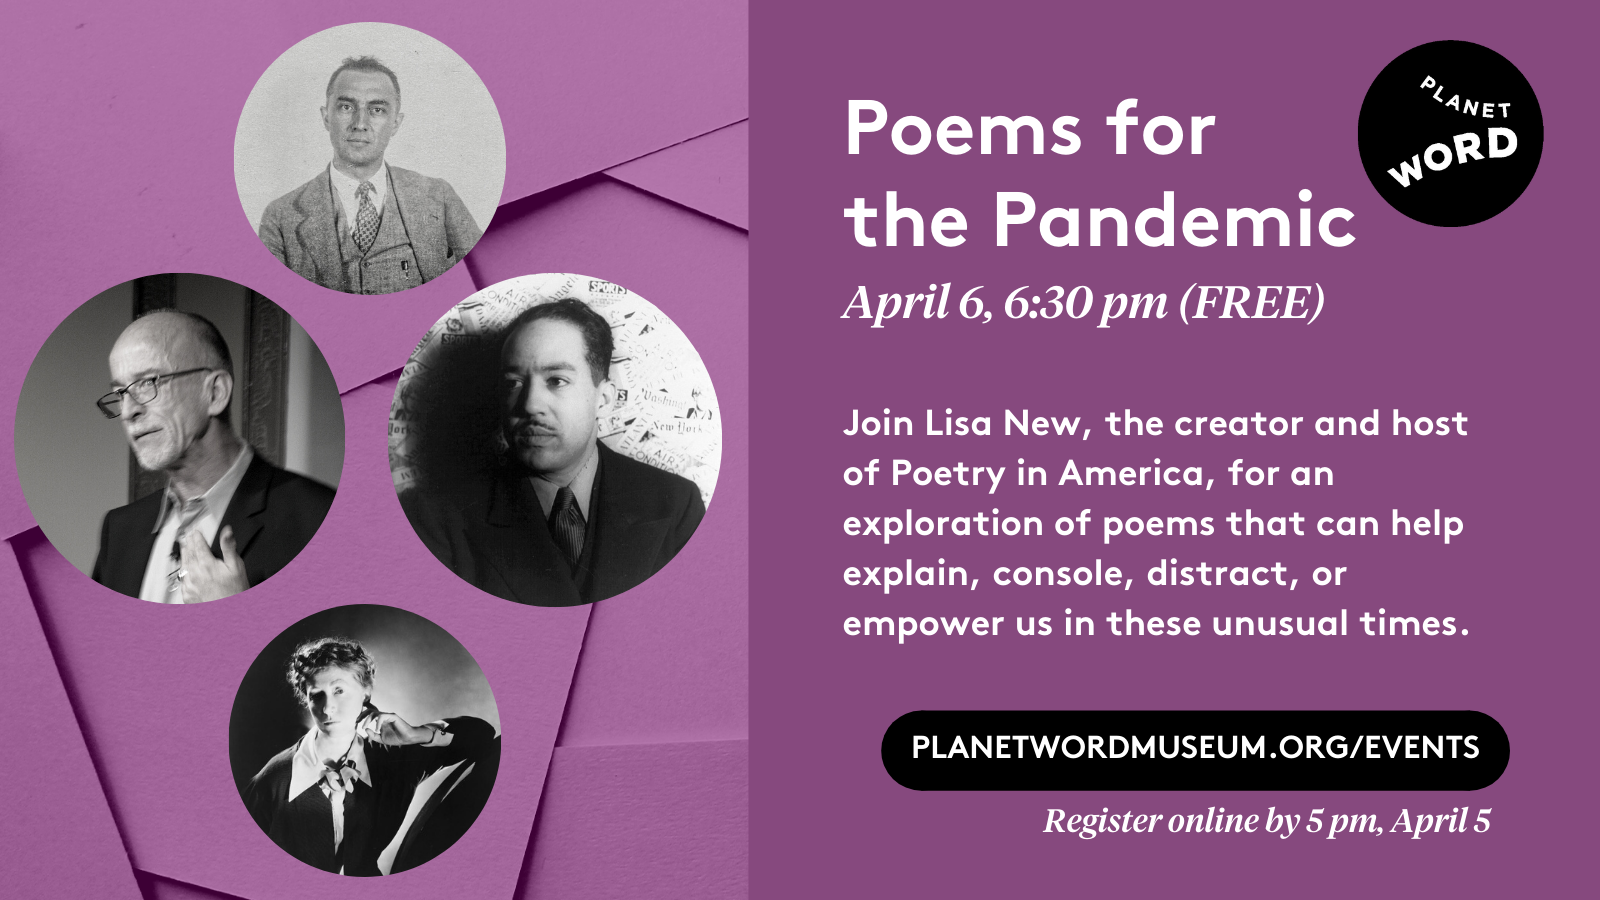 Cover for the event, "Poems for the Pandemic" with the text, "Join Lisa New, the creator and host of Poetry in America, for an exploration of poems that can help explain, console, distract, or empower us in these unusual times."